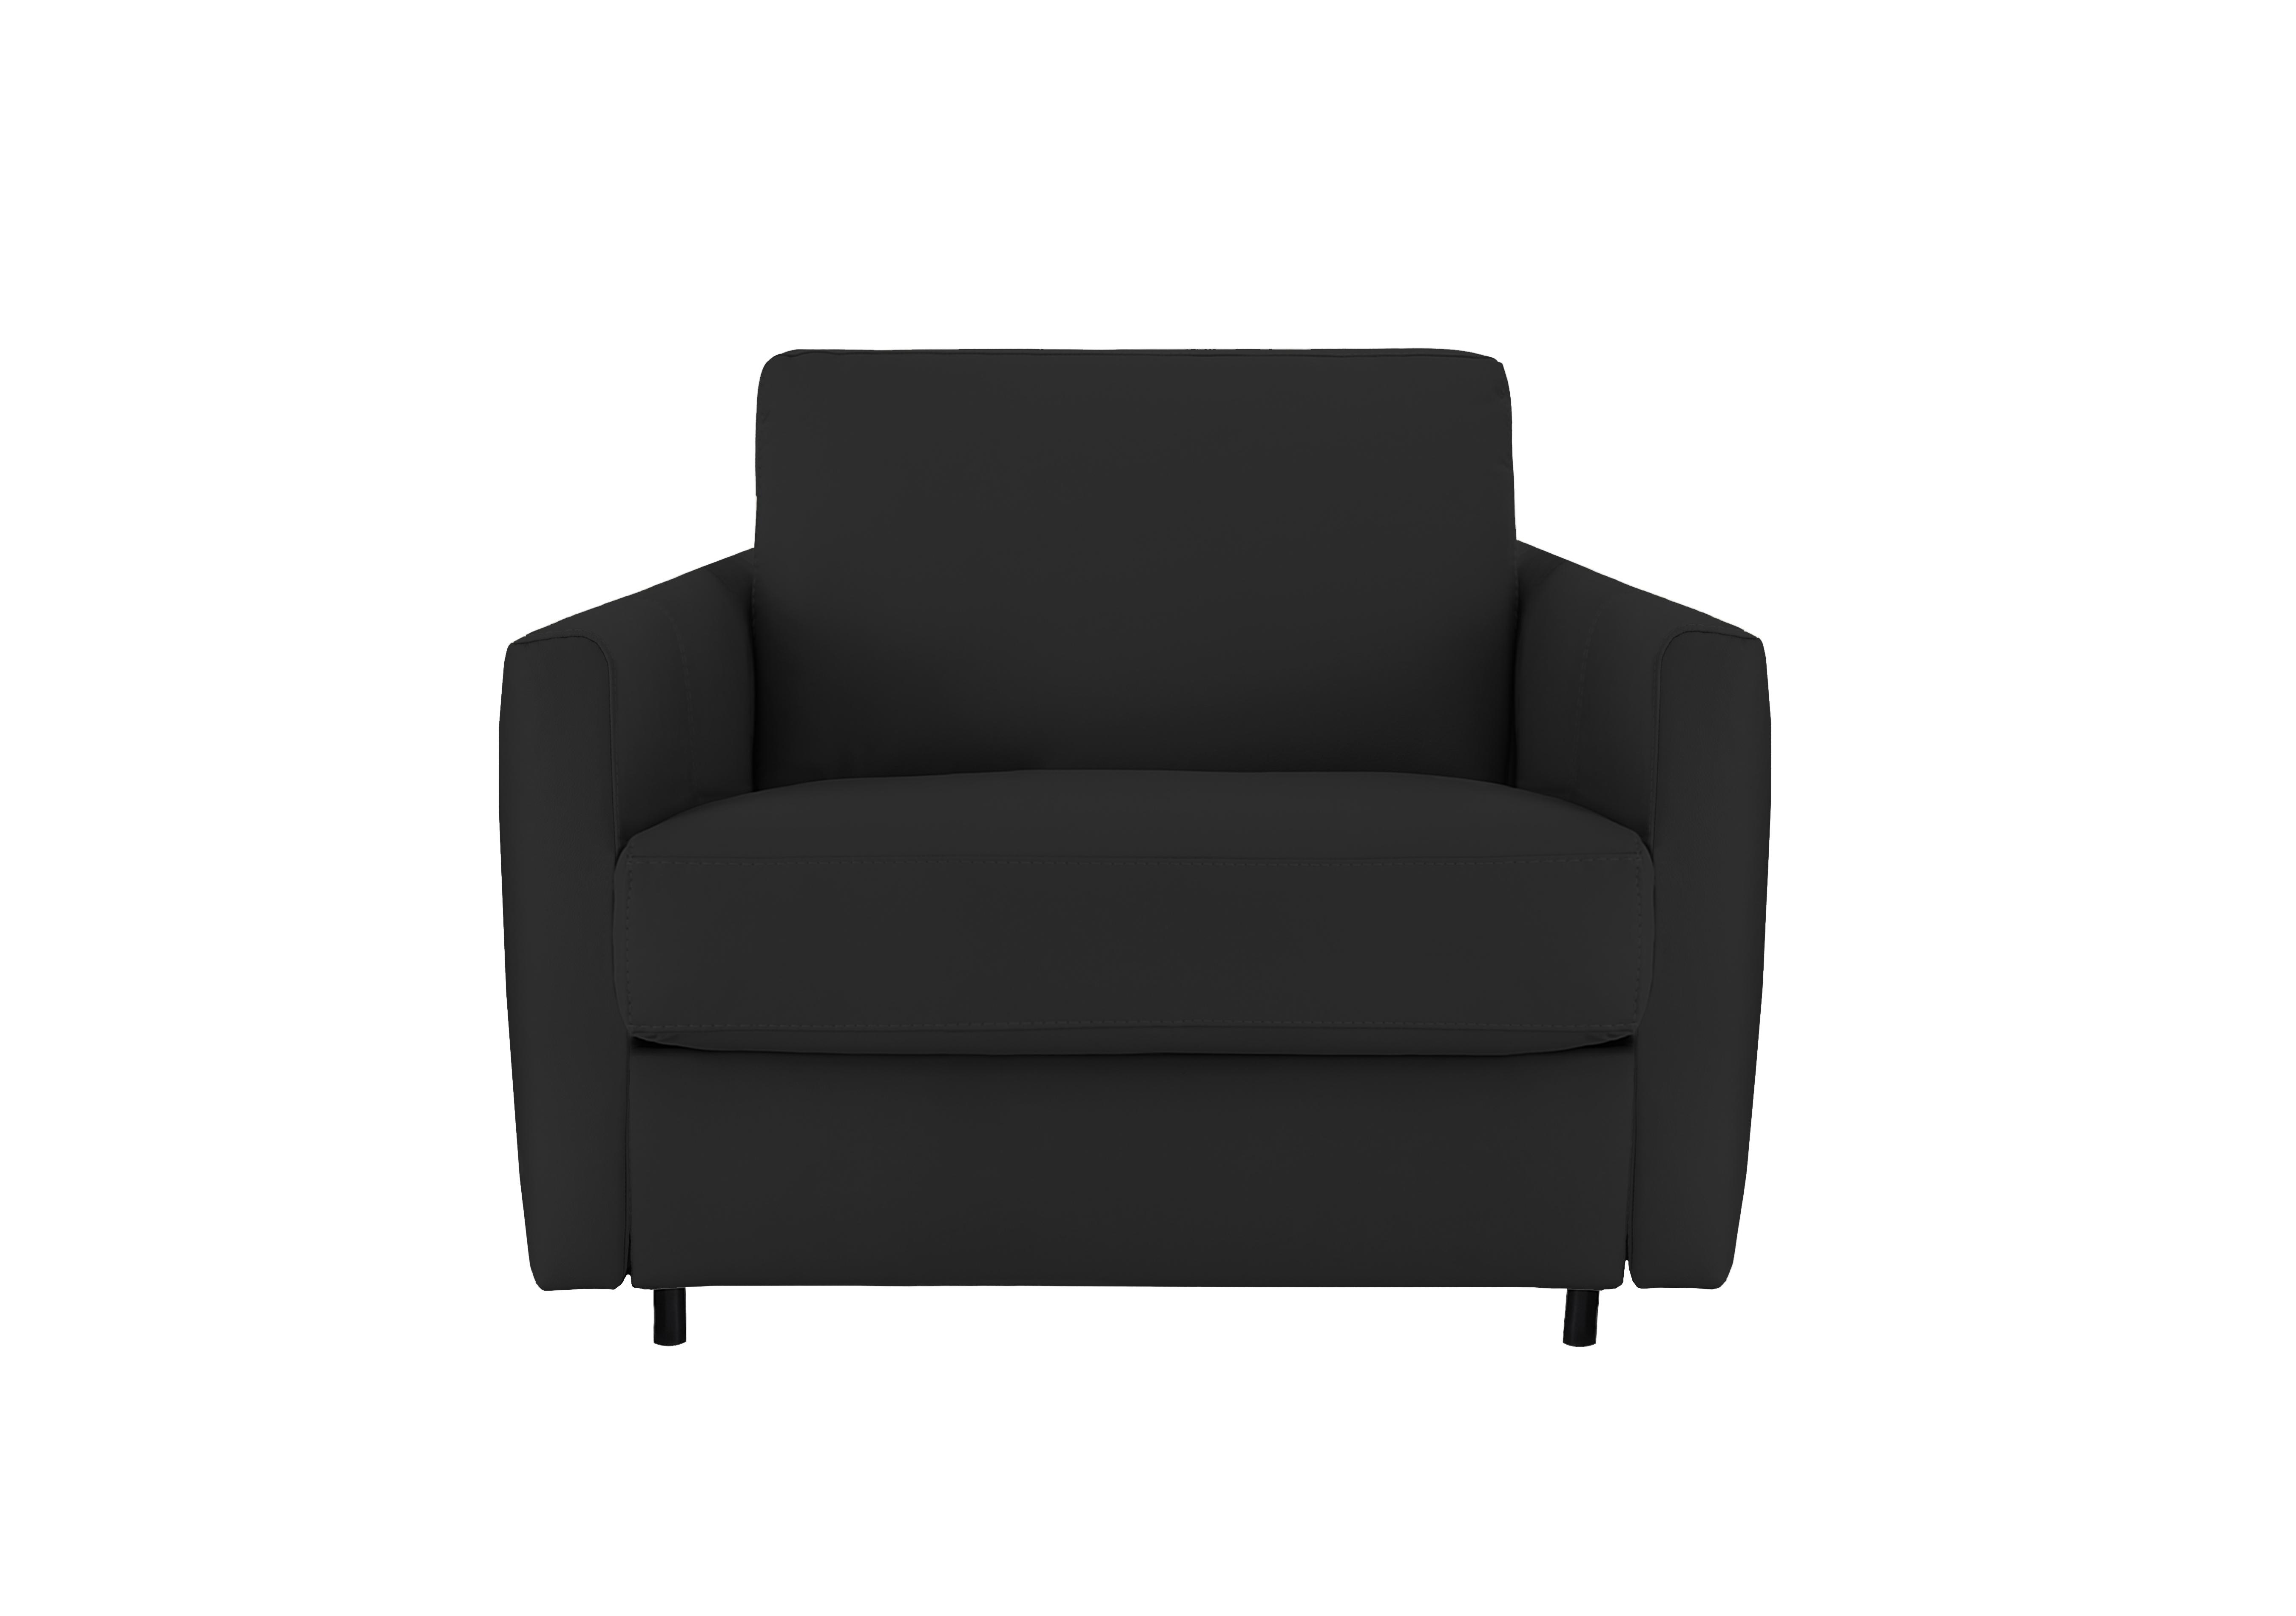 Alcova Leather Chair Sofa Bed with Slim Arms in Torello Nero 71 on Furniture Village